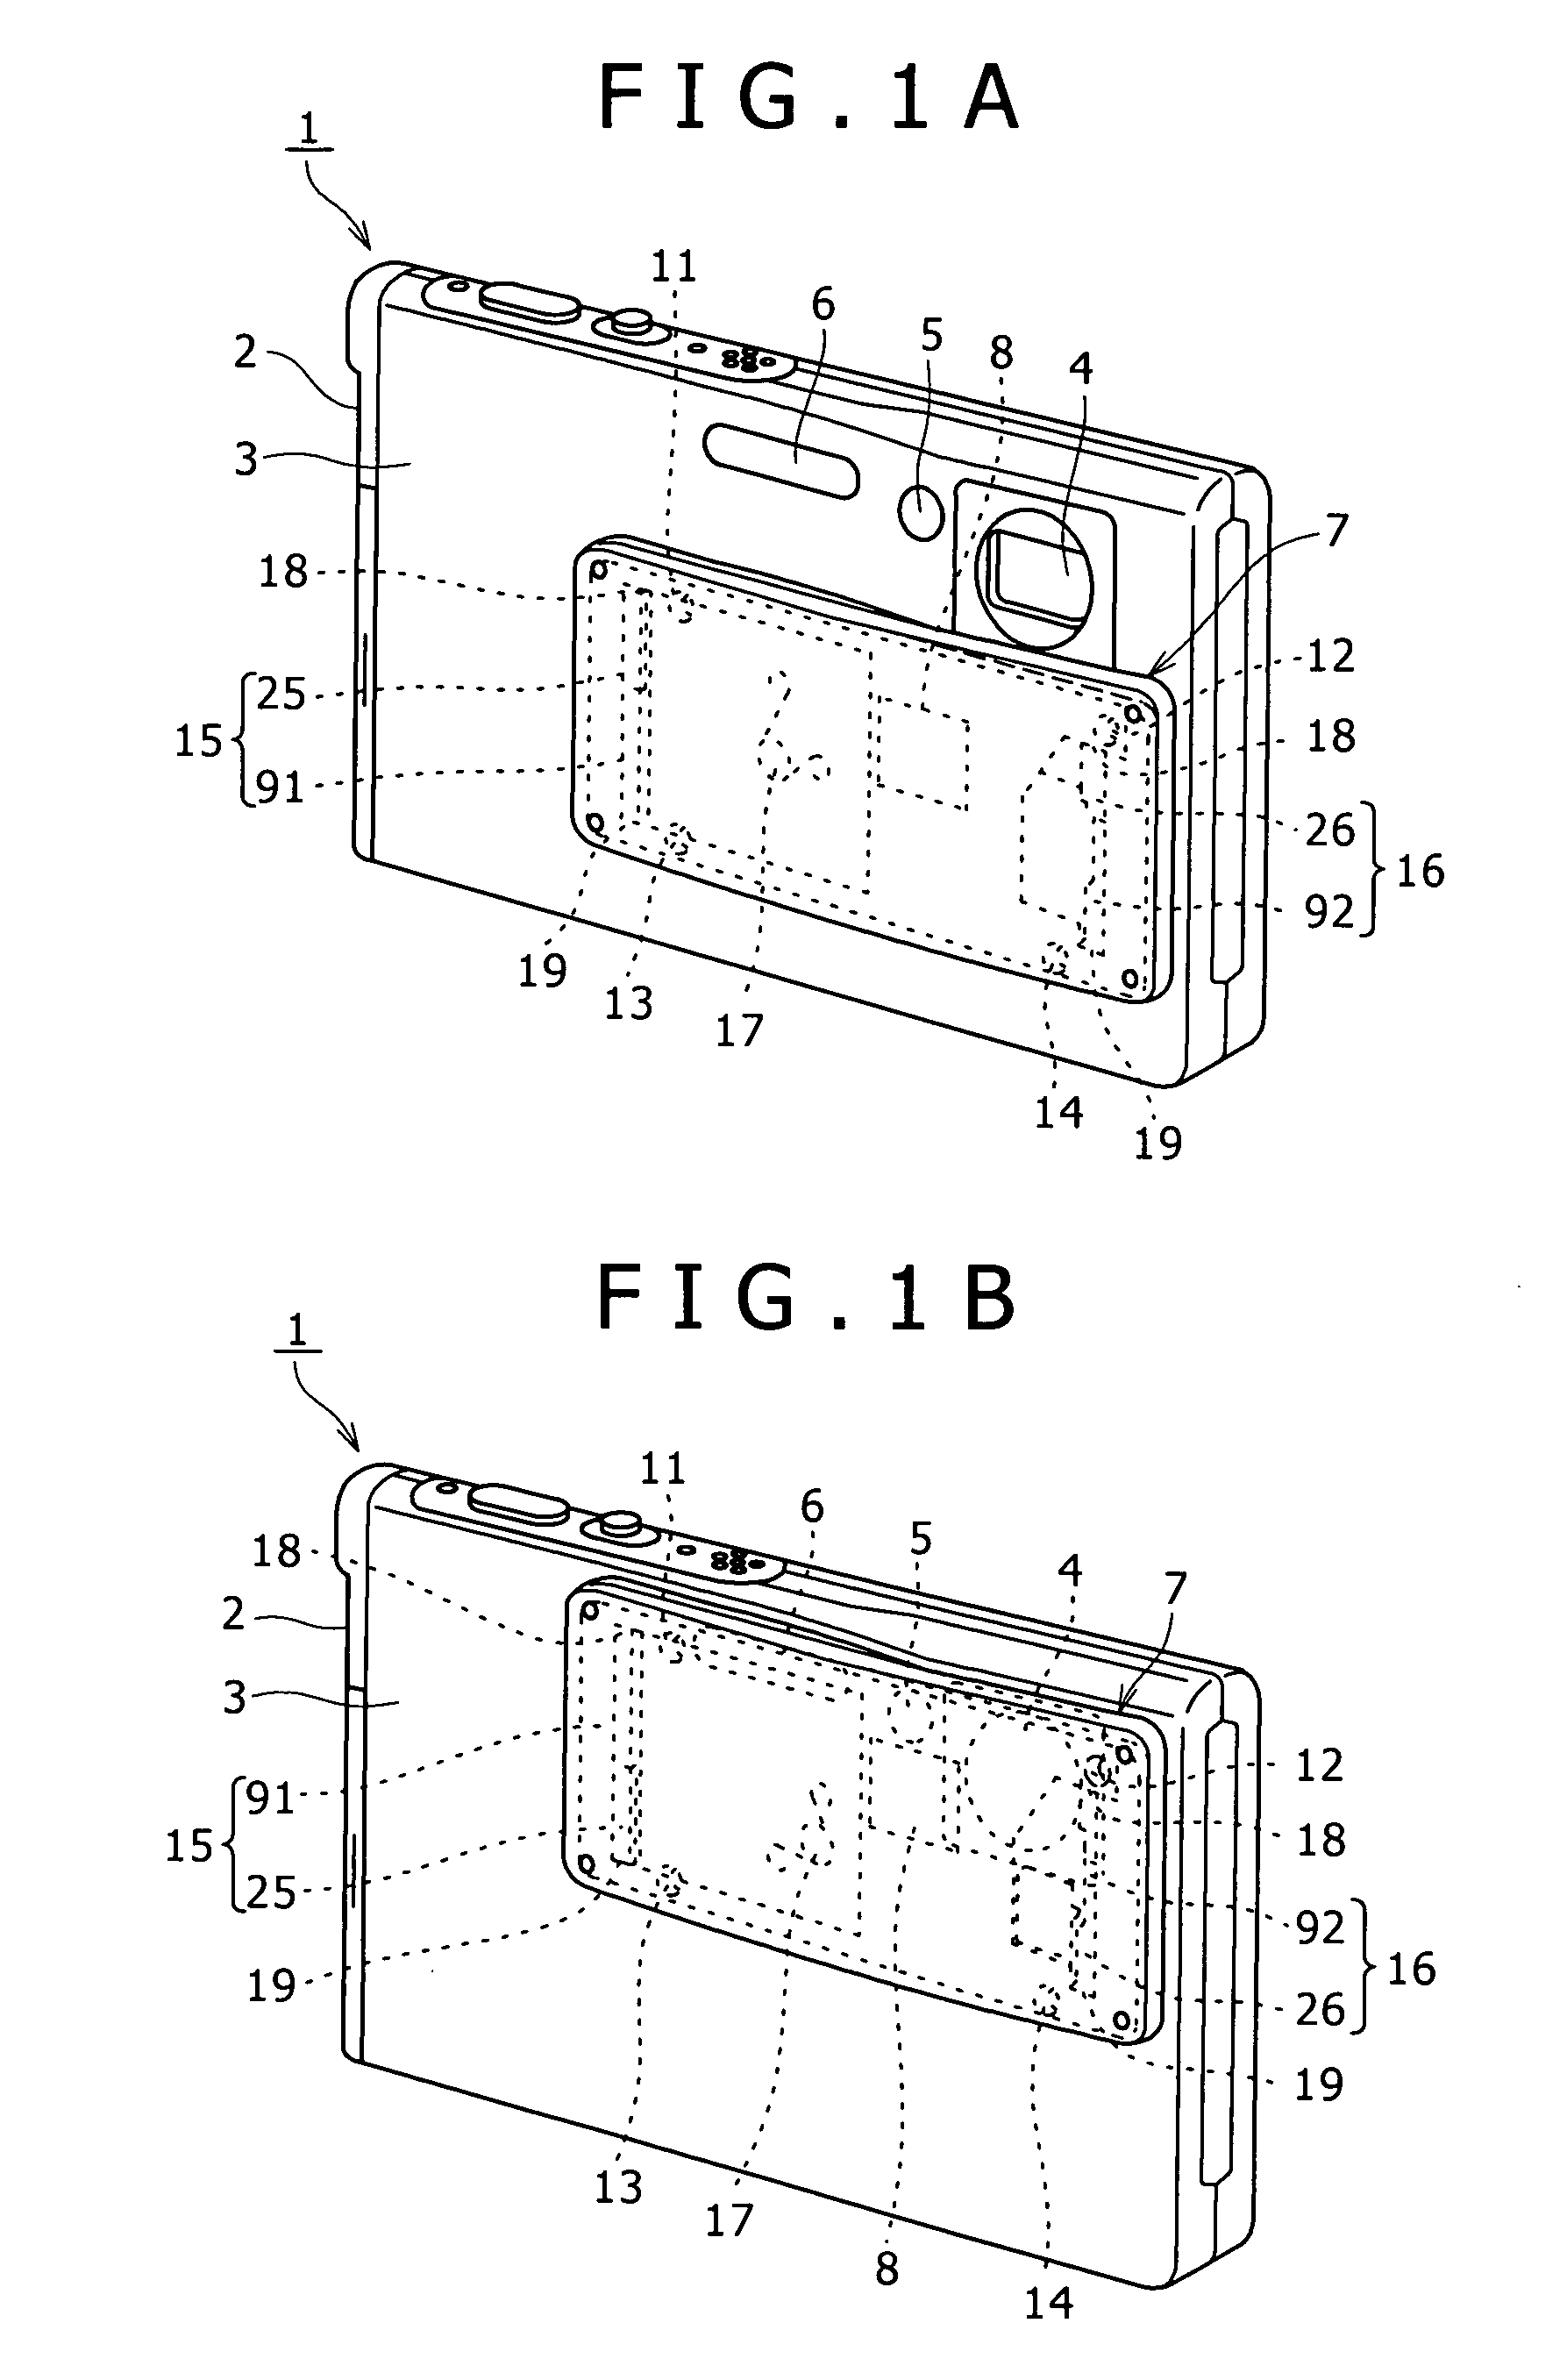 Electronic instrument